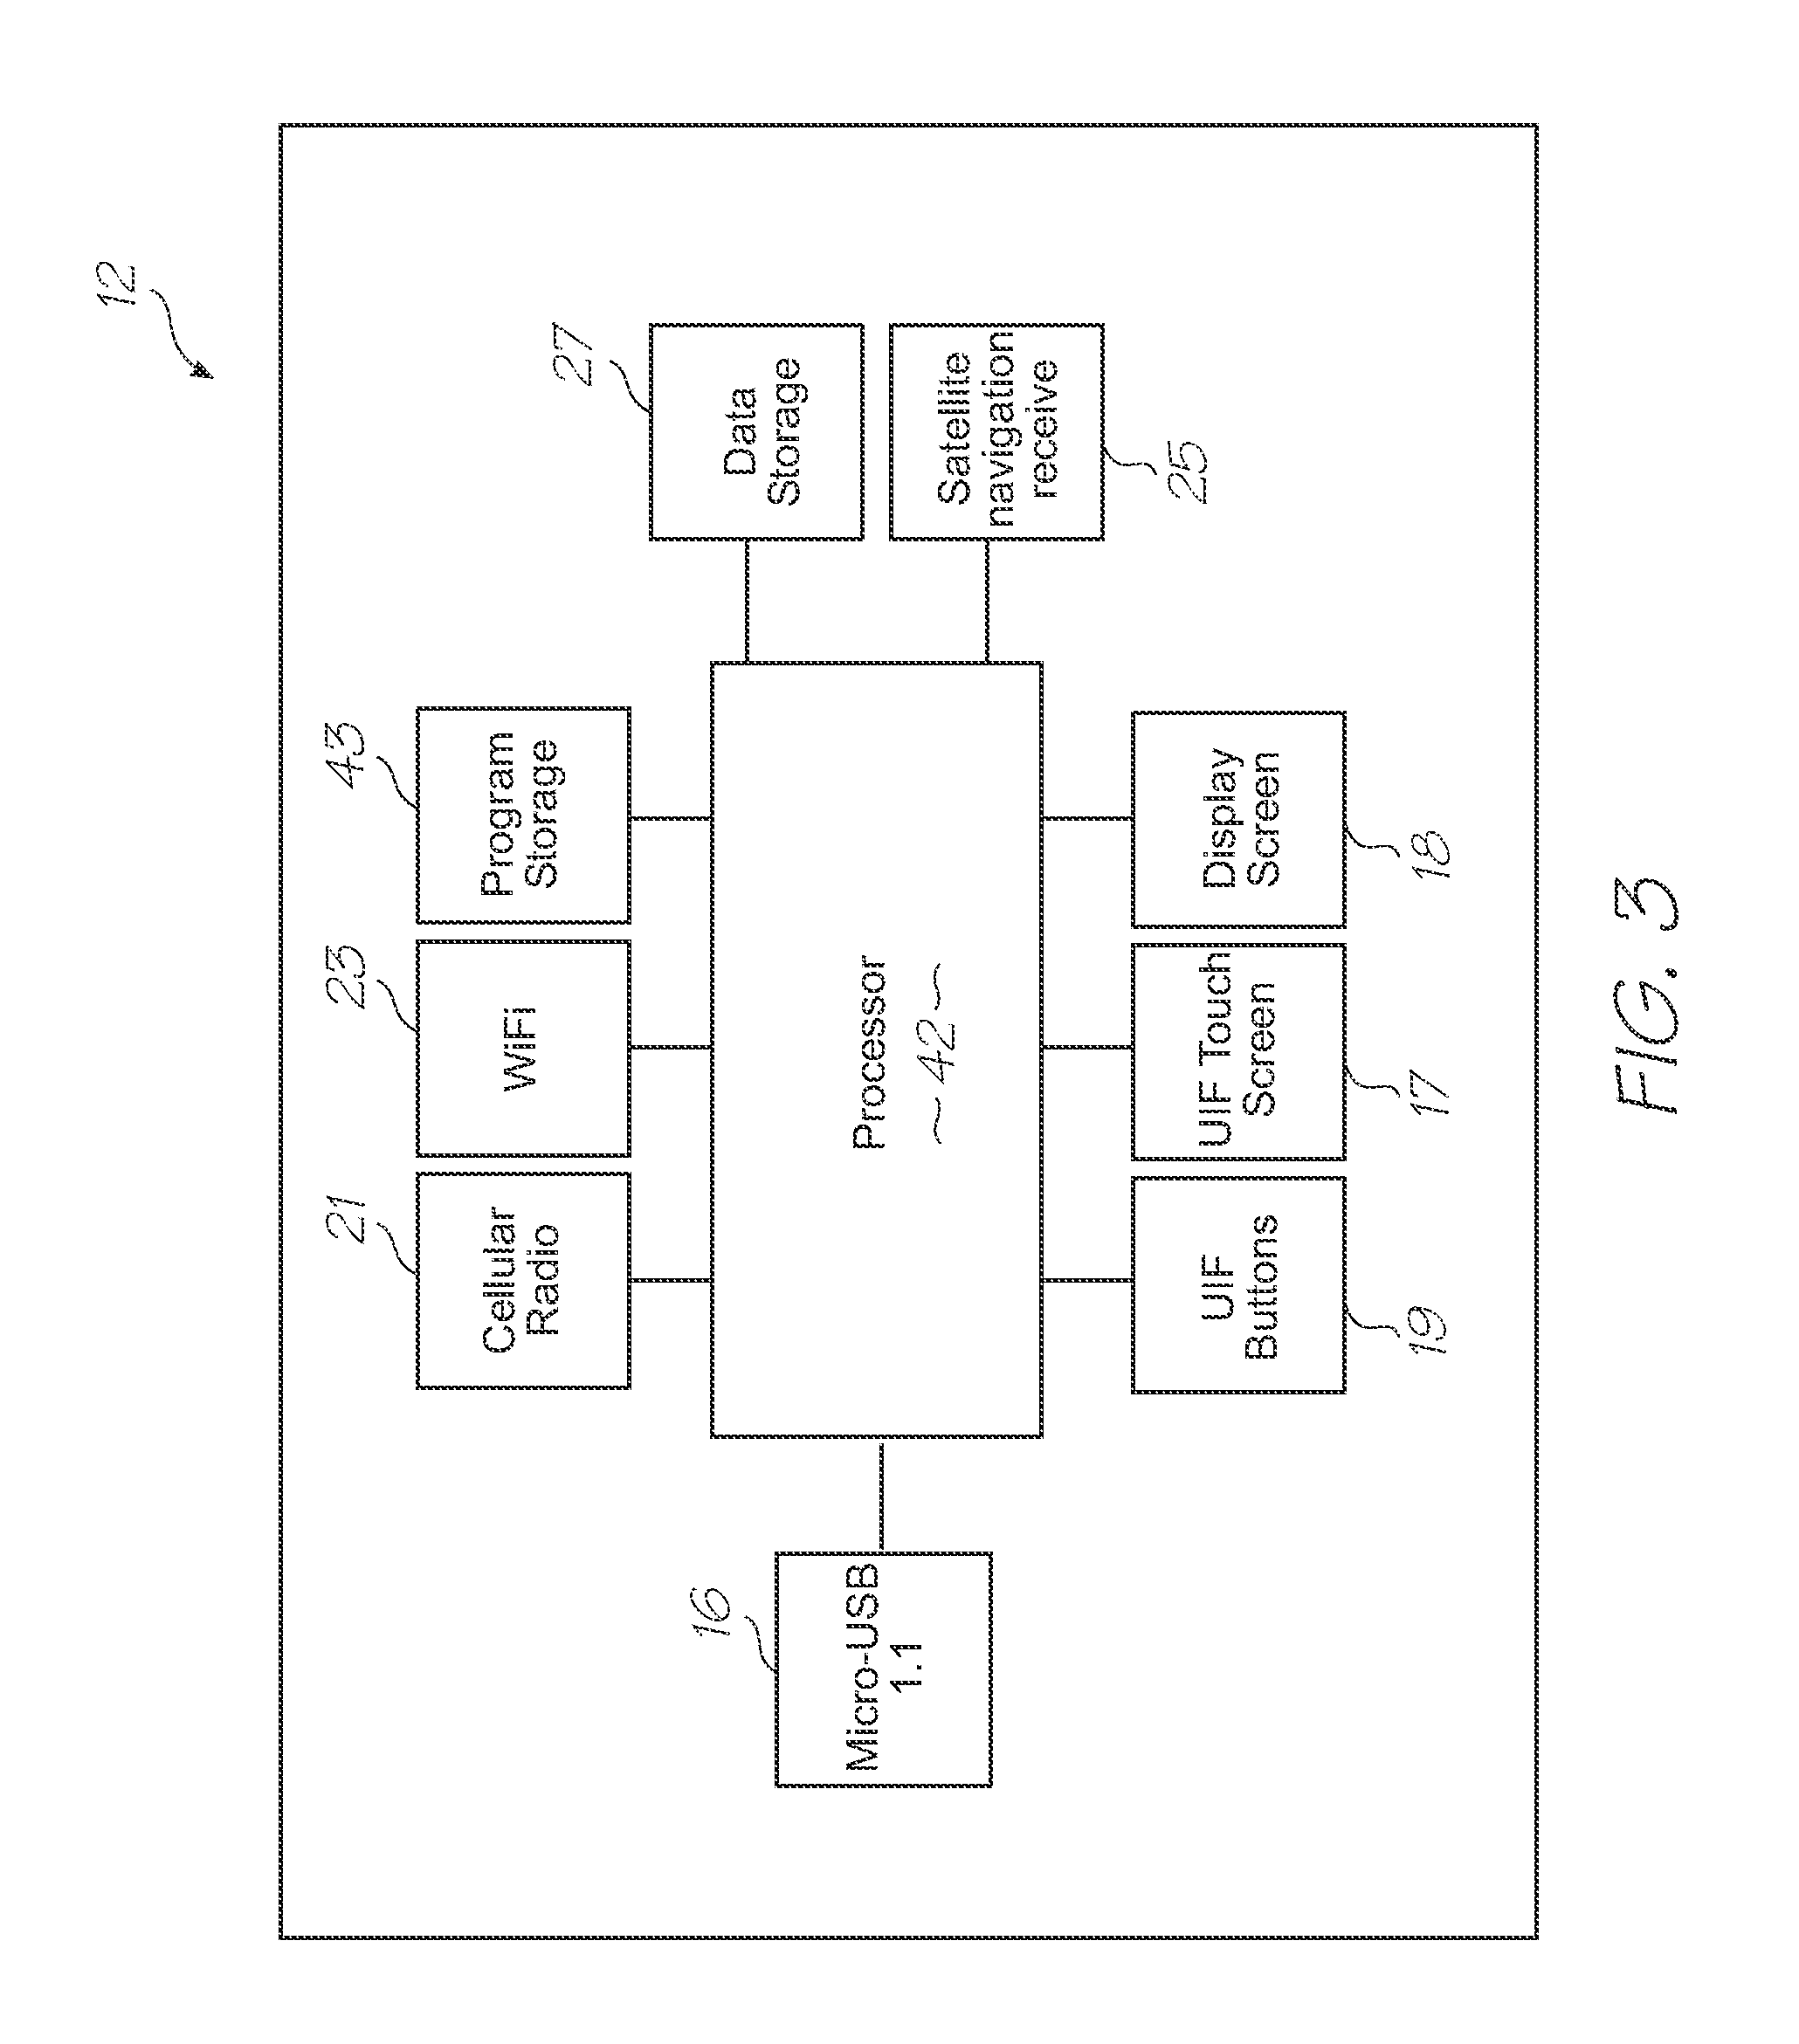 Loc device for electrochemiluminescent detection of target nucleic acid sequences in a fluid with calibration chamber containing probes designed to be non-complementary with any nucleic acid sequences in the fluid